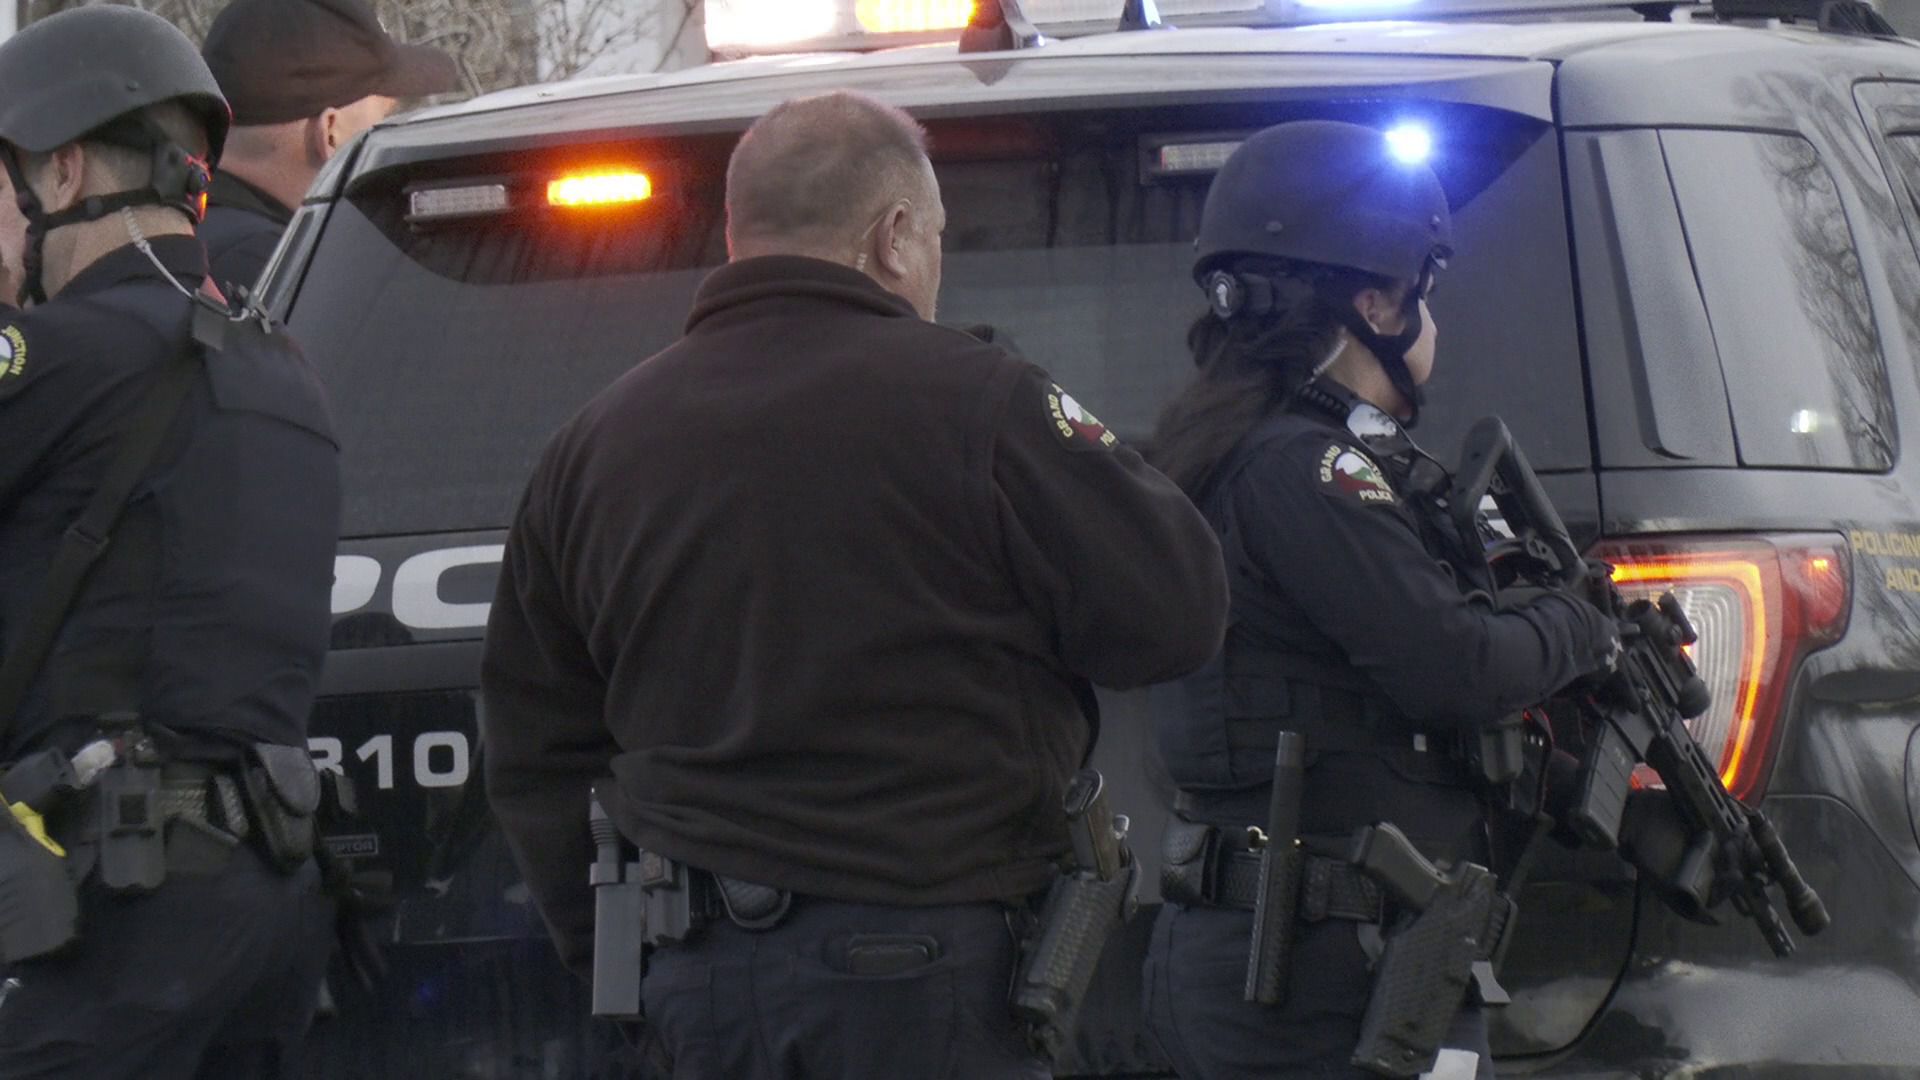 SWAT Team Arrests 46 Year Old Man For Allegedly Threatening A Person With A Firearm